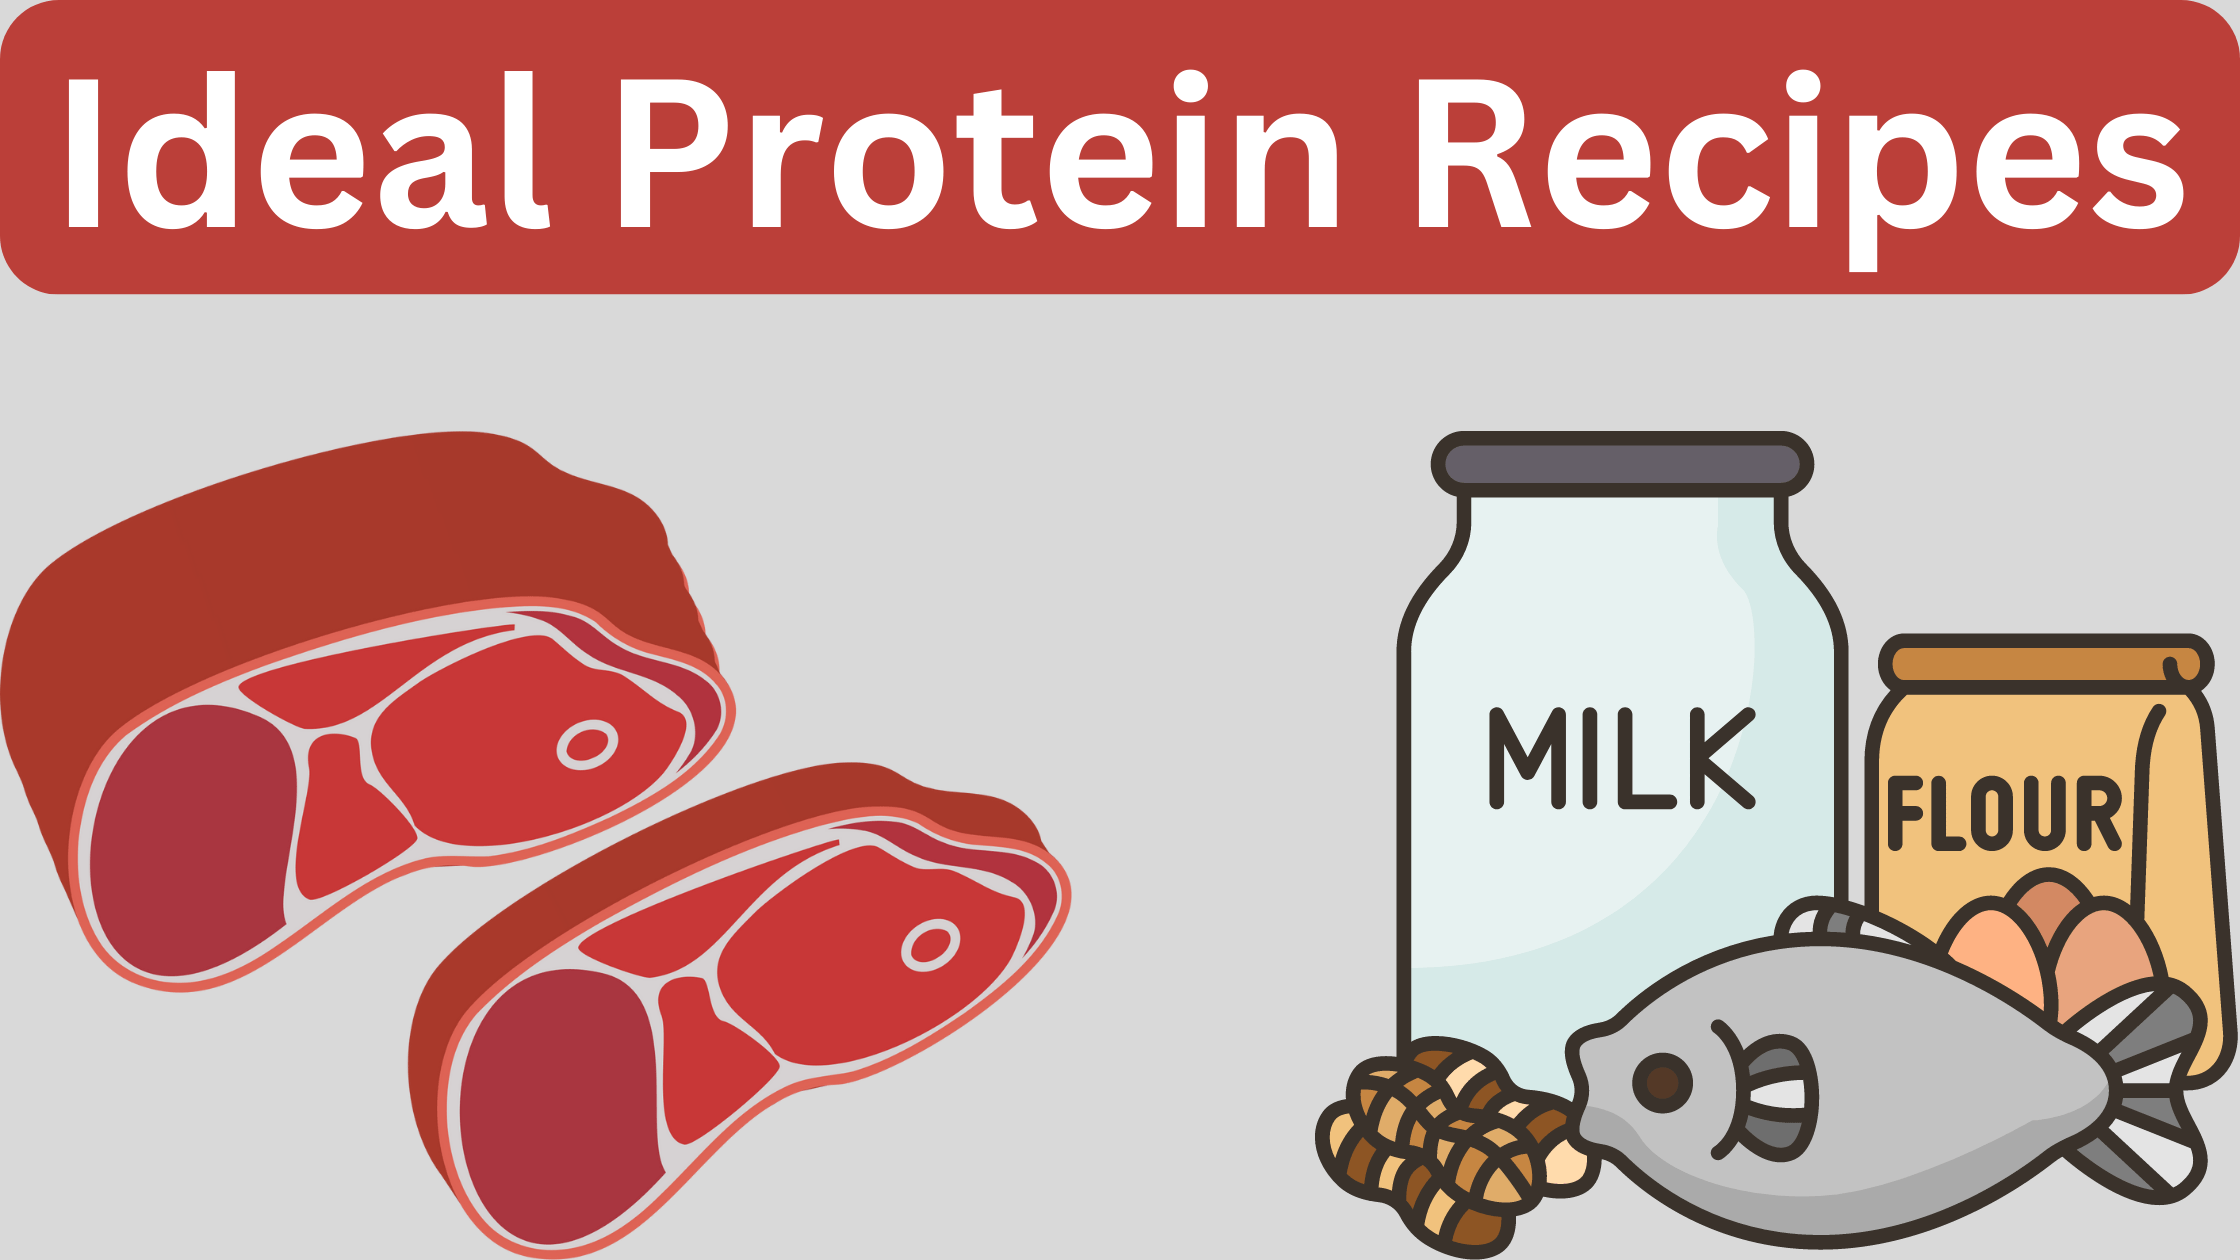 Ideal Protein Recipes